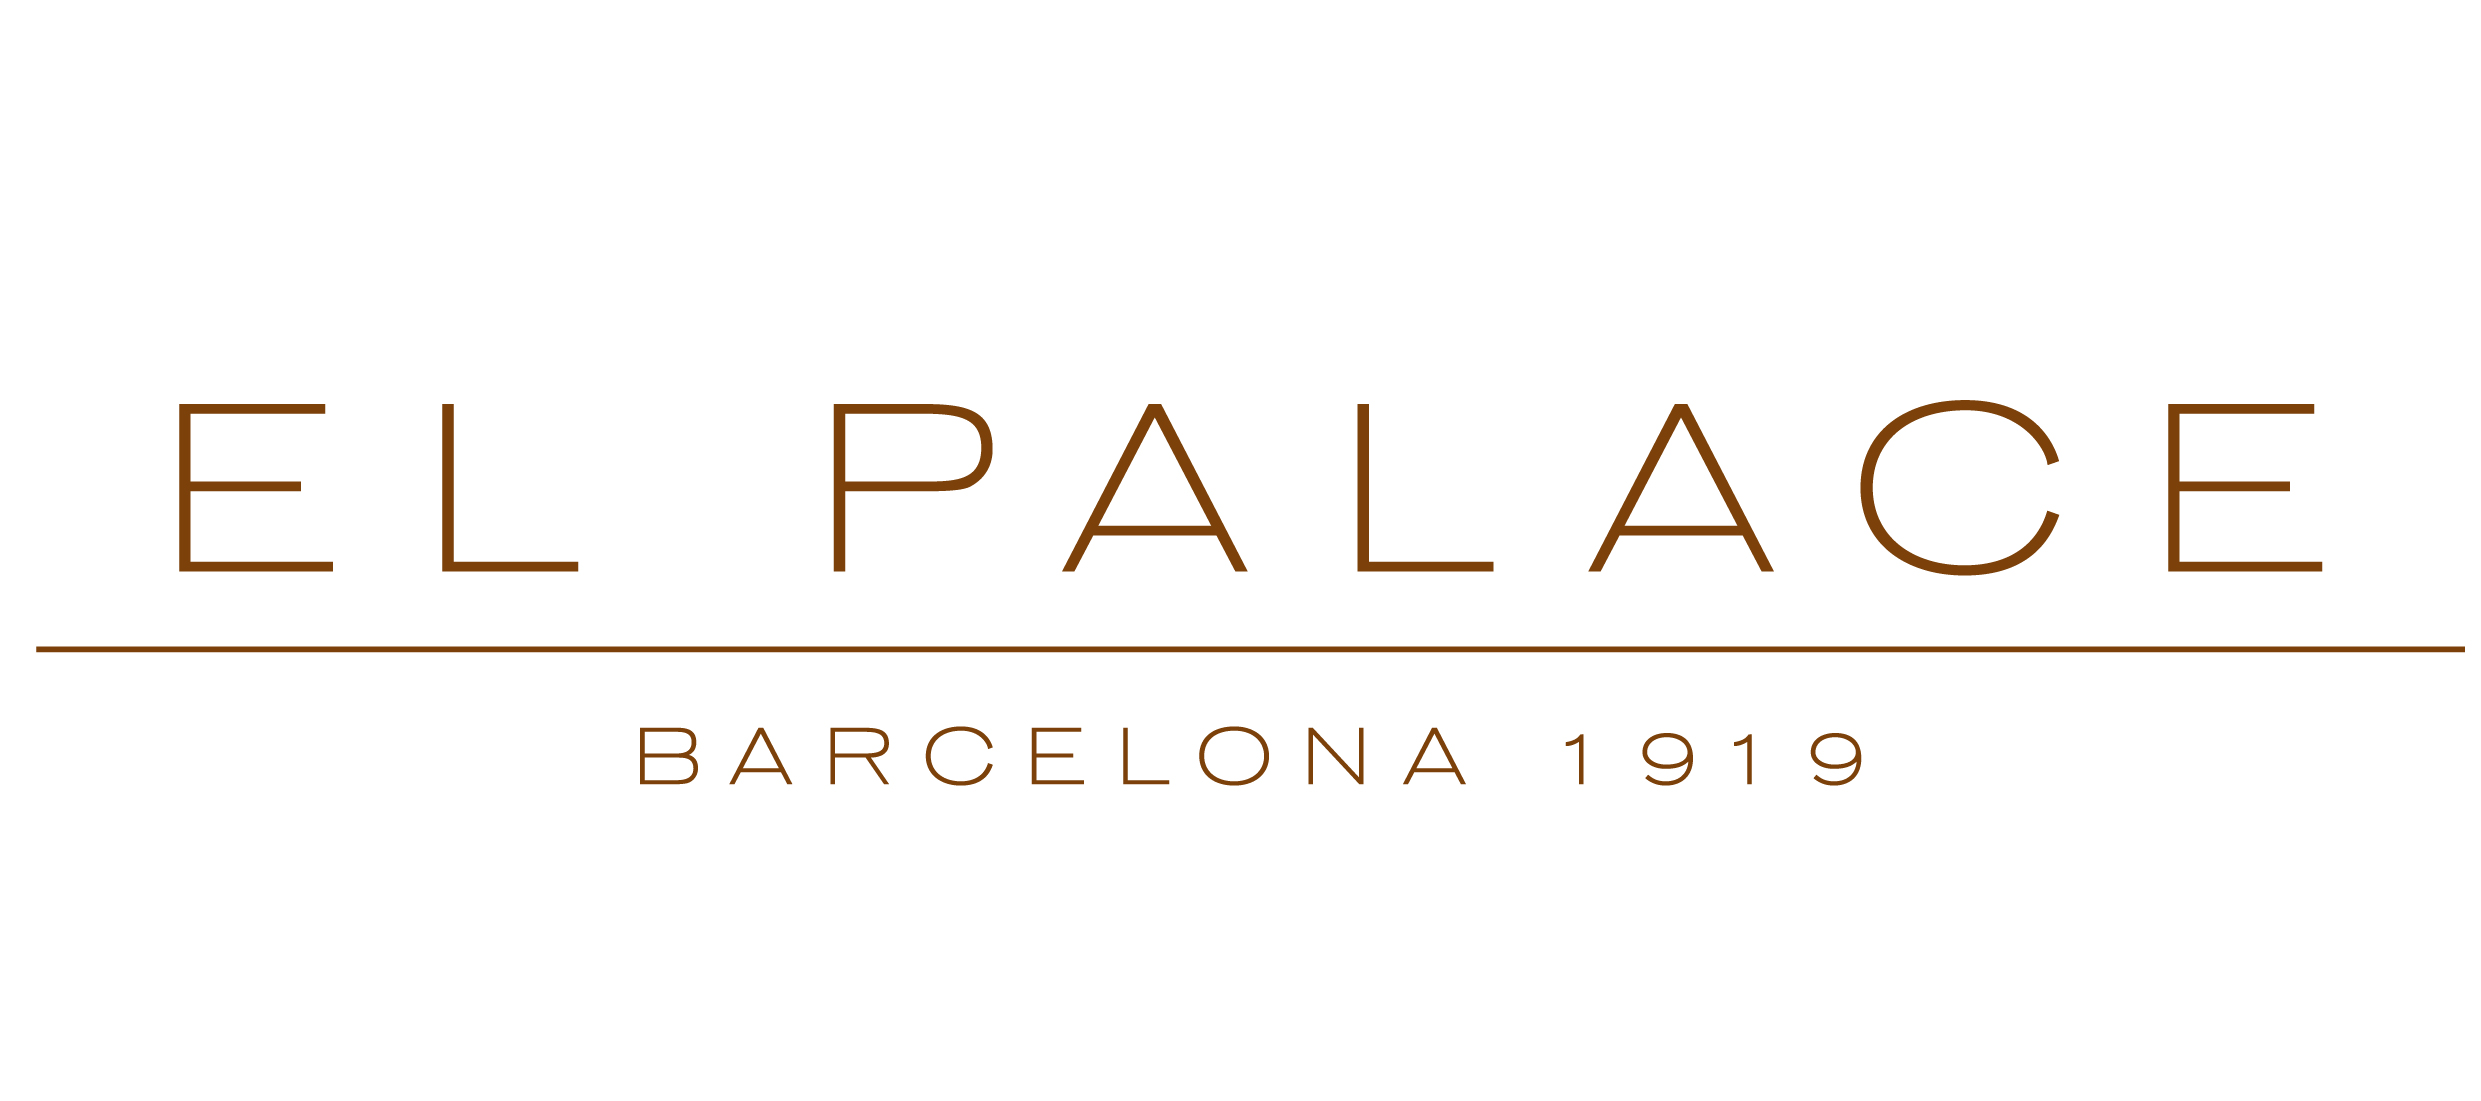 Meetings Events At El Palace Barcelona Barcelona Spain Conference Hotel Group